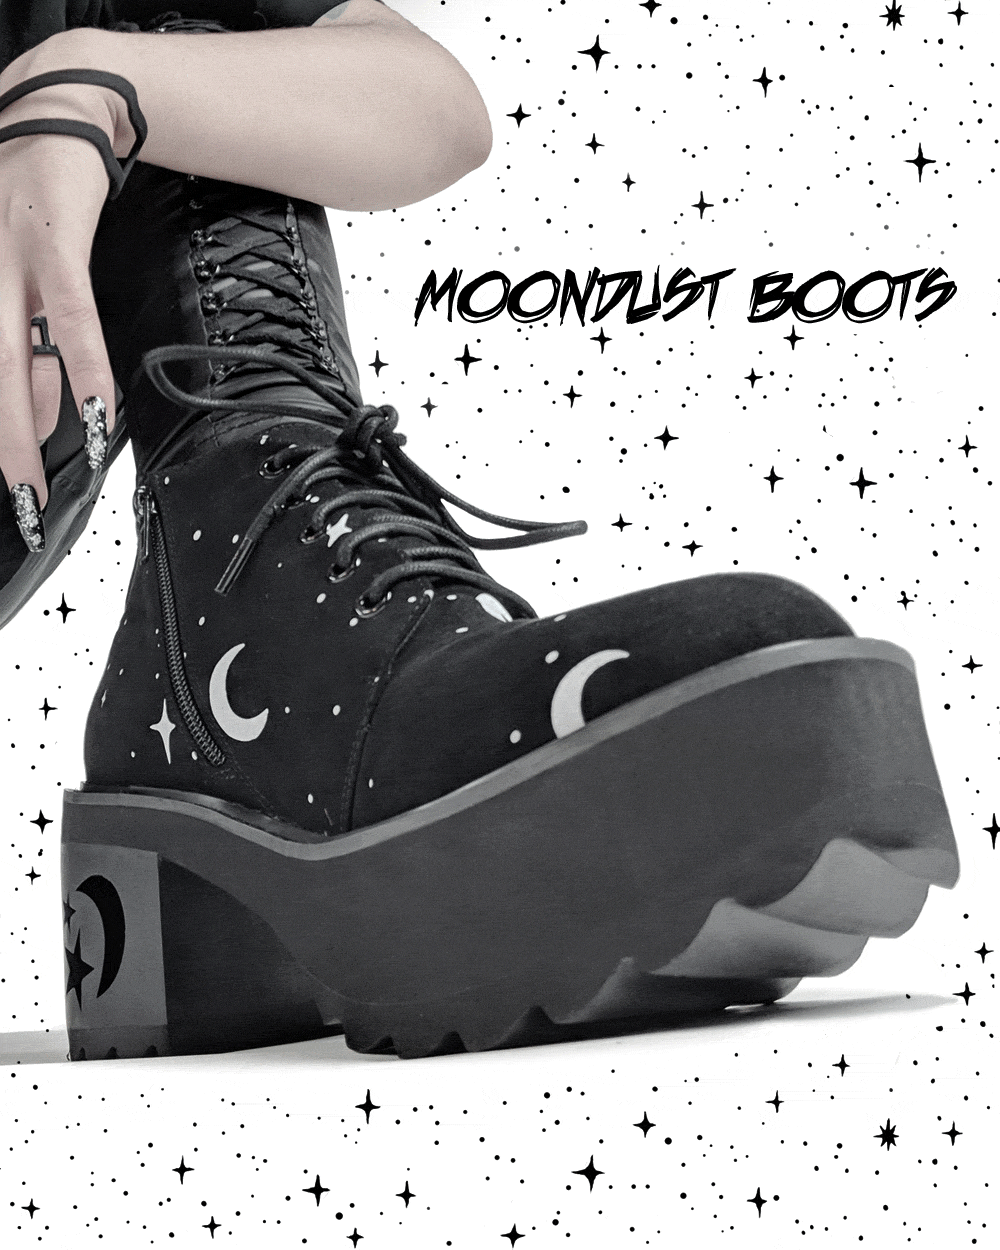 MoonDust Boots - Luxurious Quality Vegan Suede Goth Shoes with Moons & Stars, Witchy Alt Style, Occult Grunge Aesthetic, Soft Memory foam inner panels! | UK6